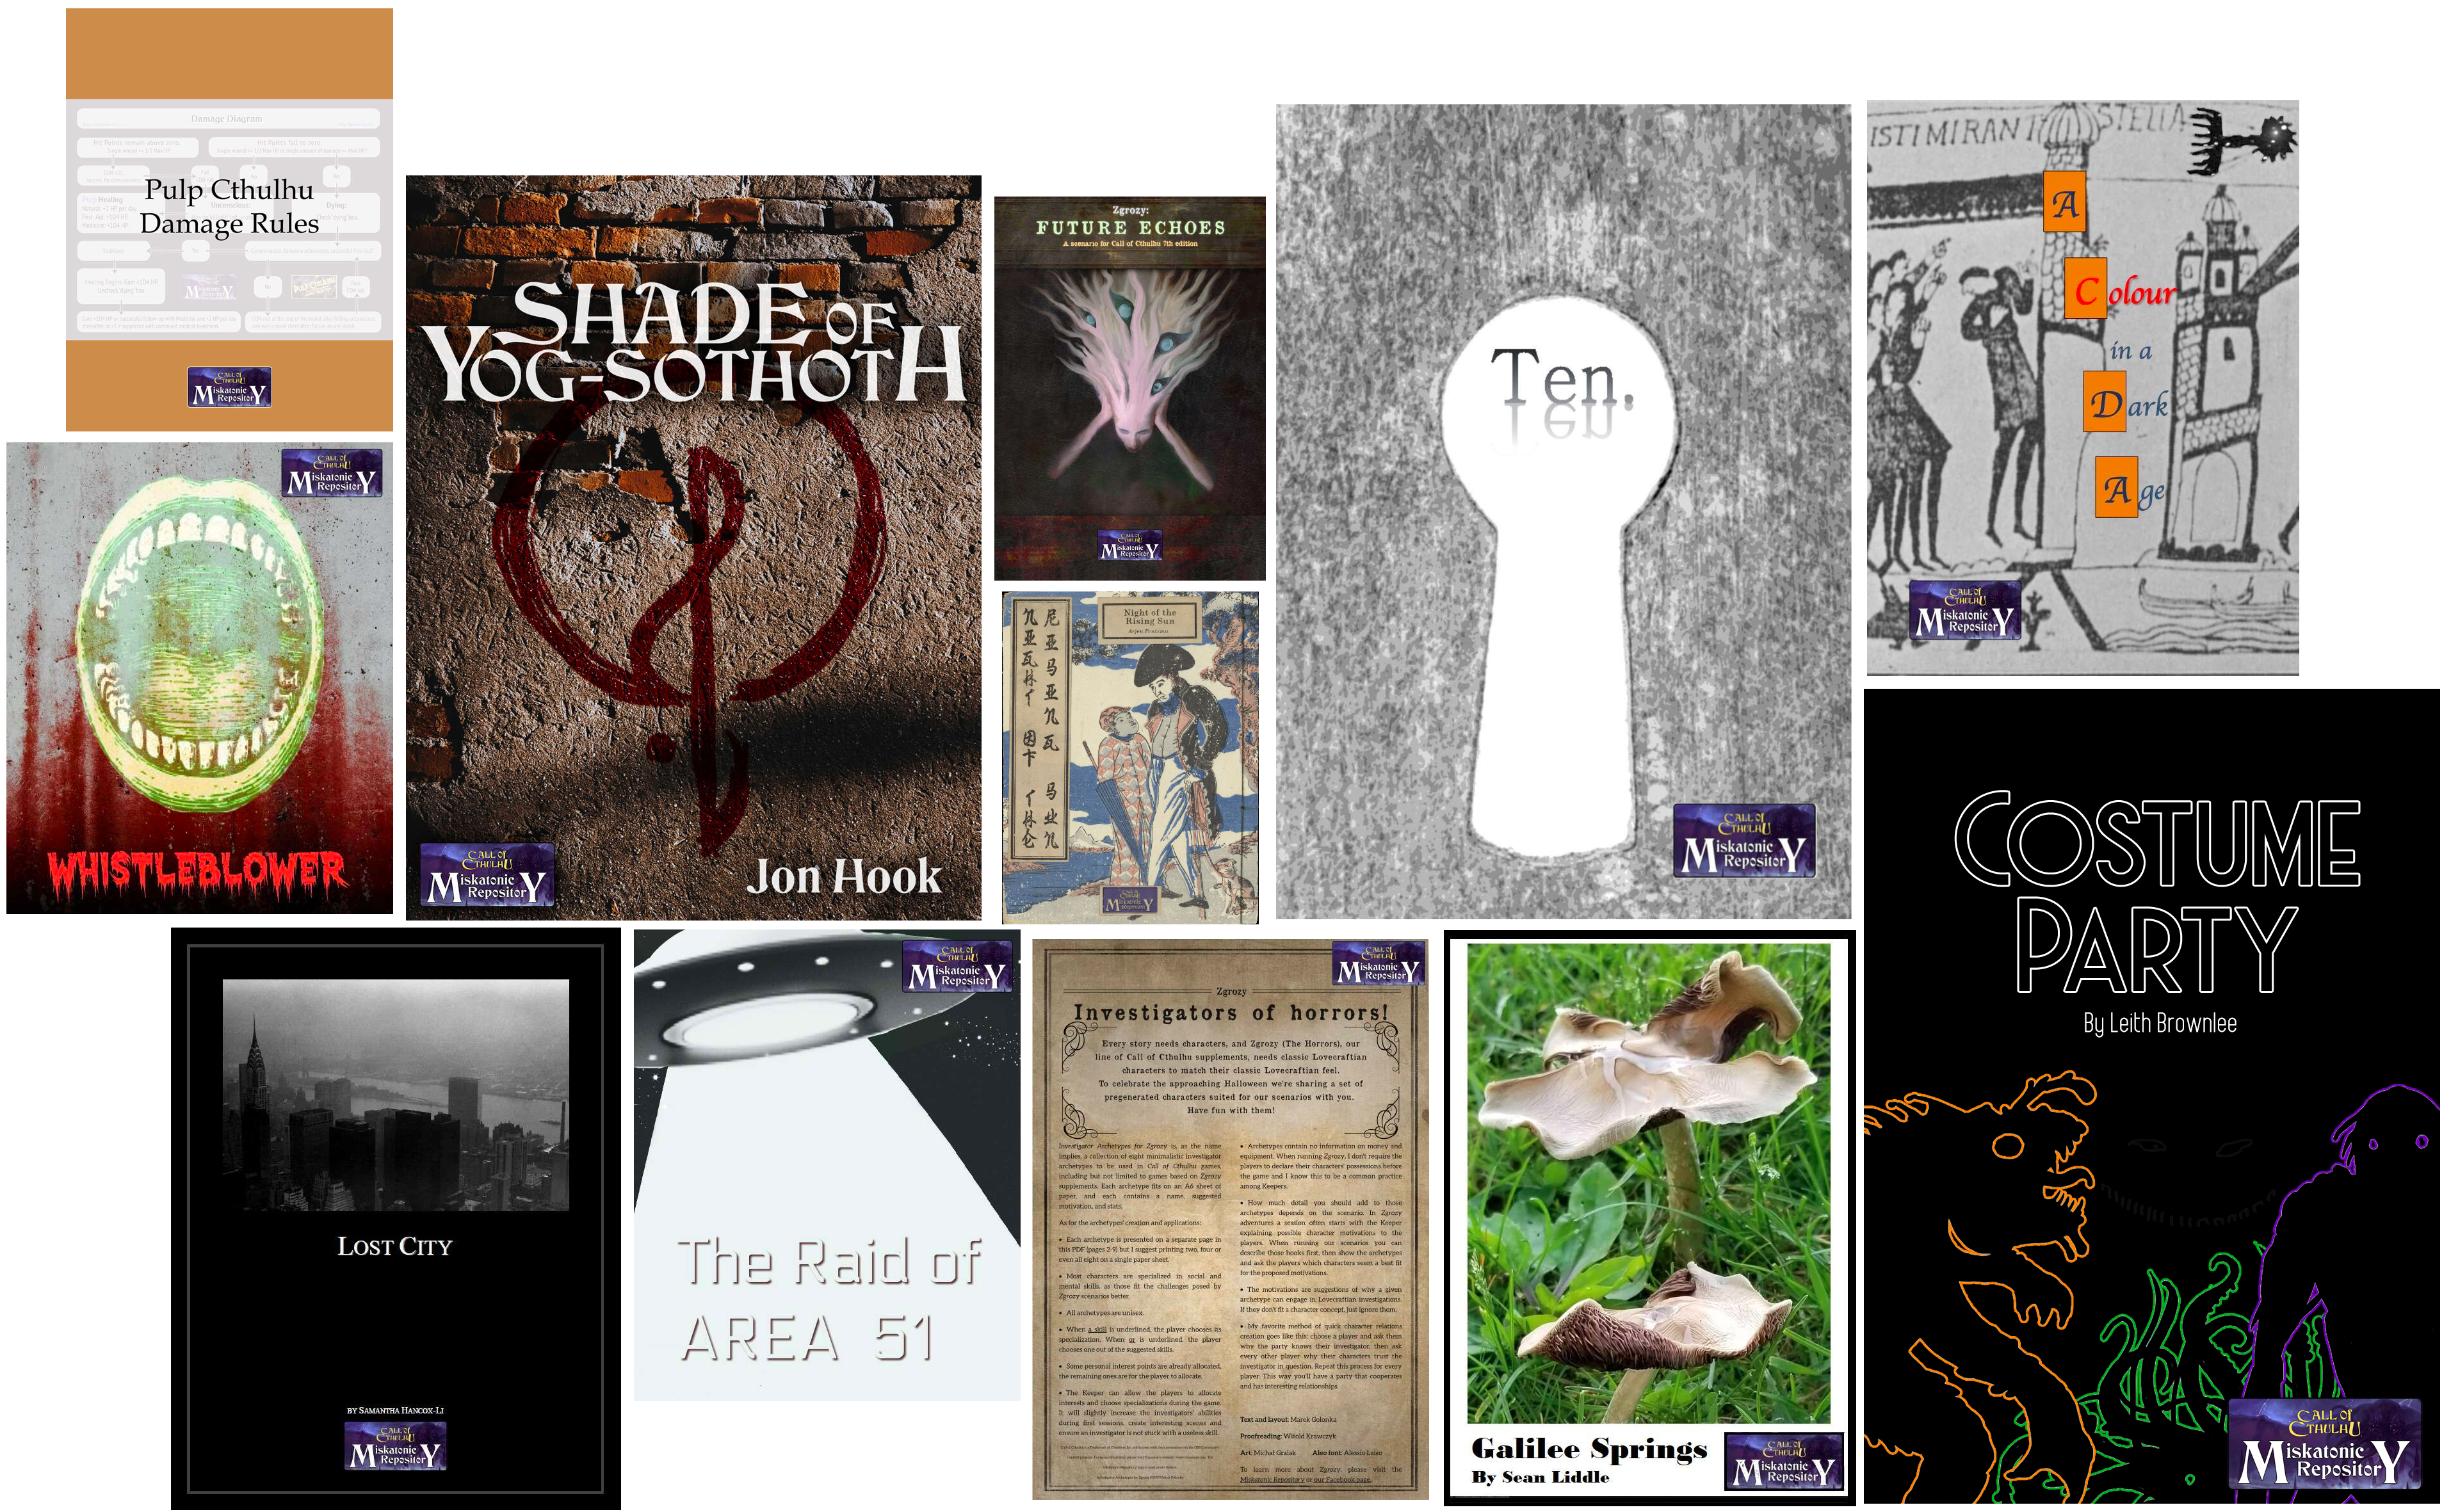 https://www.chaosium.com/product_images/uploaded_images/misk-r-nov-2019.png